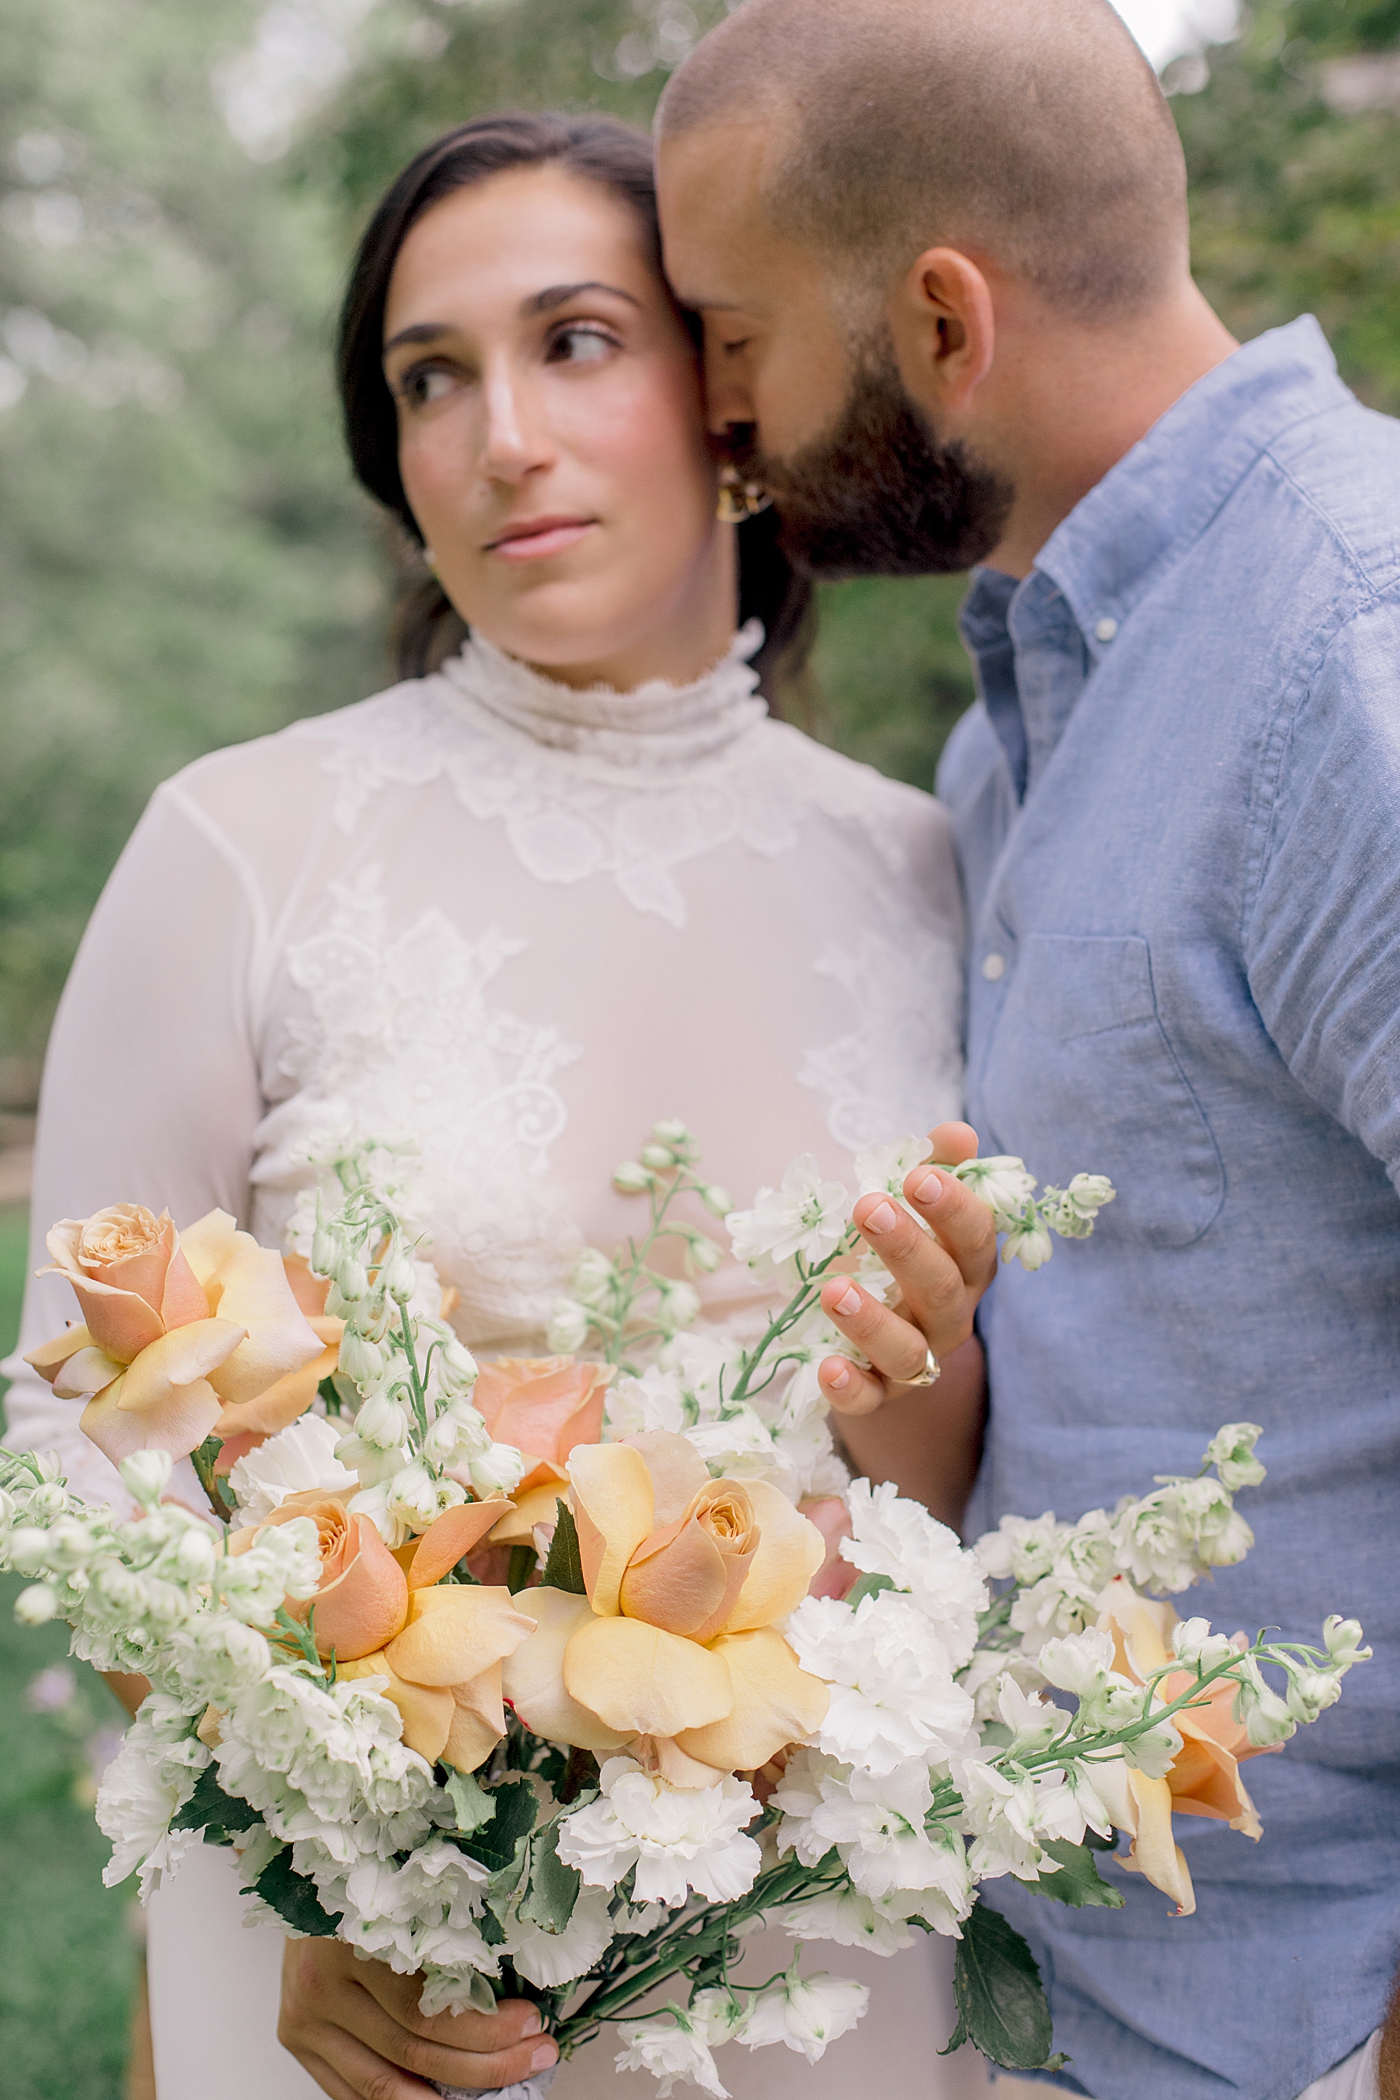 Groom nuzzling brides cheeks while she holds a peach colored bouquet | Image by Hope Helmuth Photography